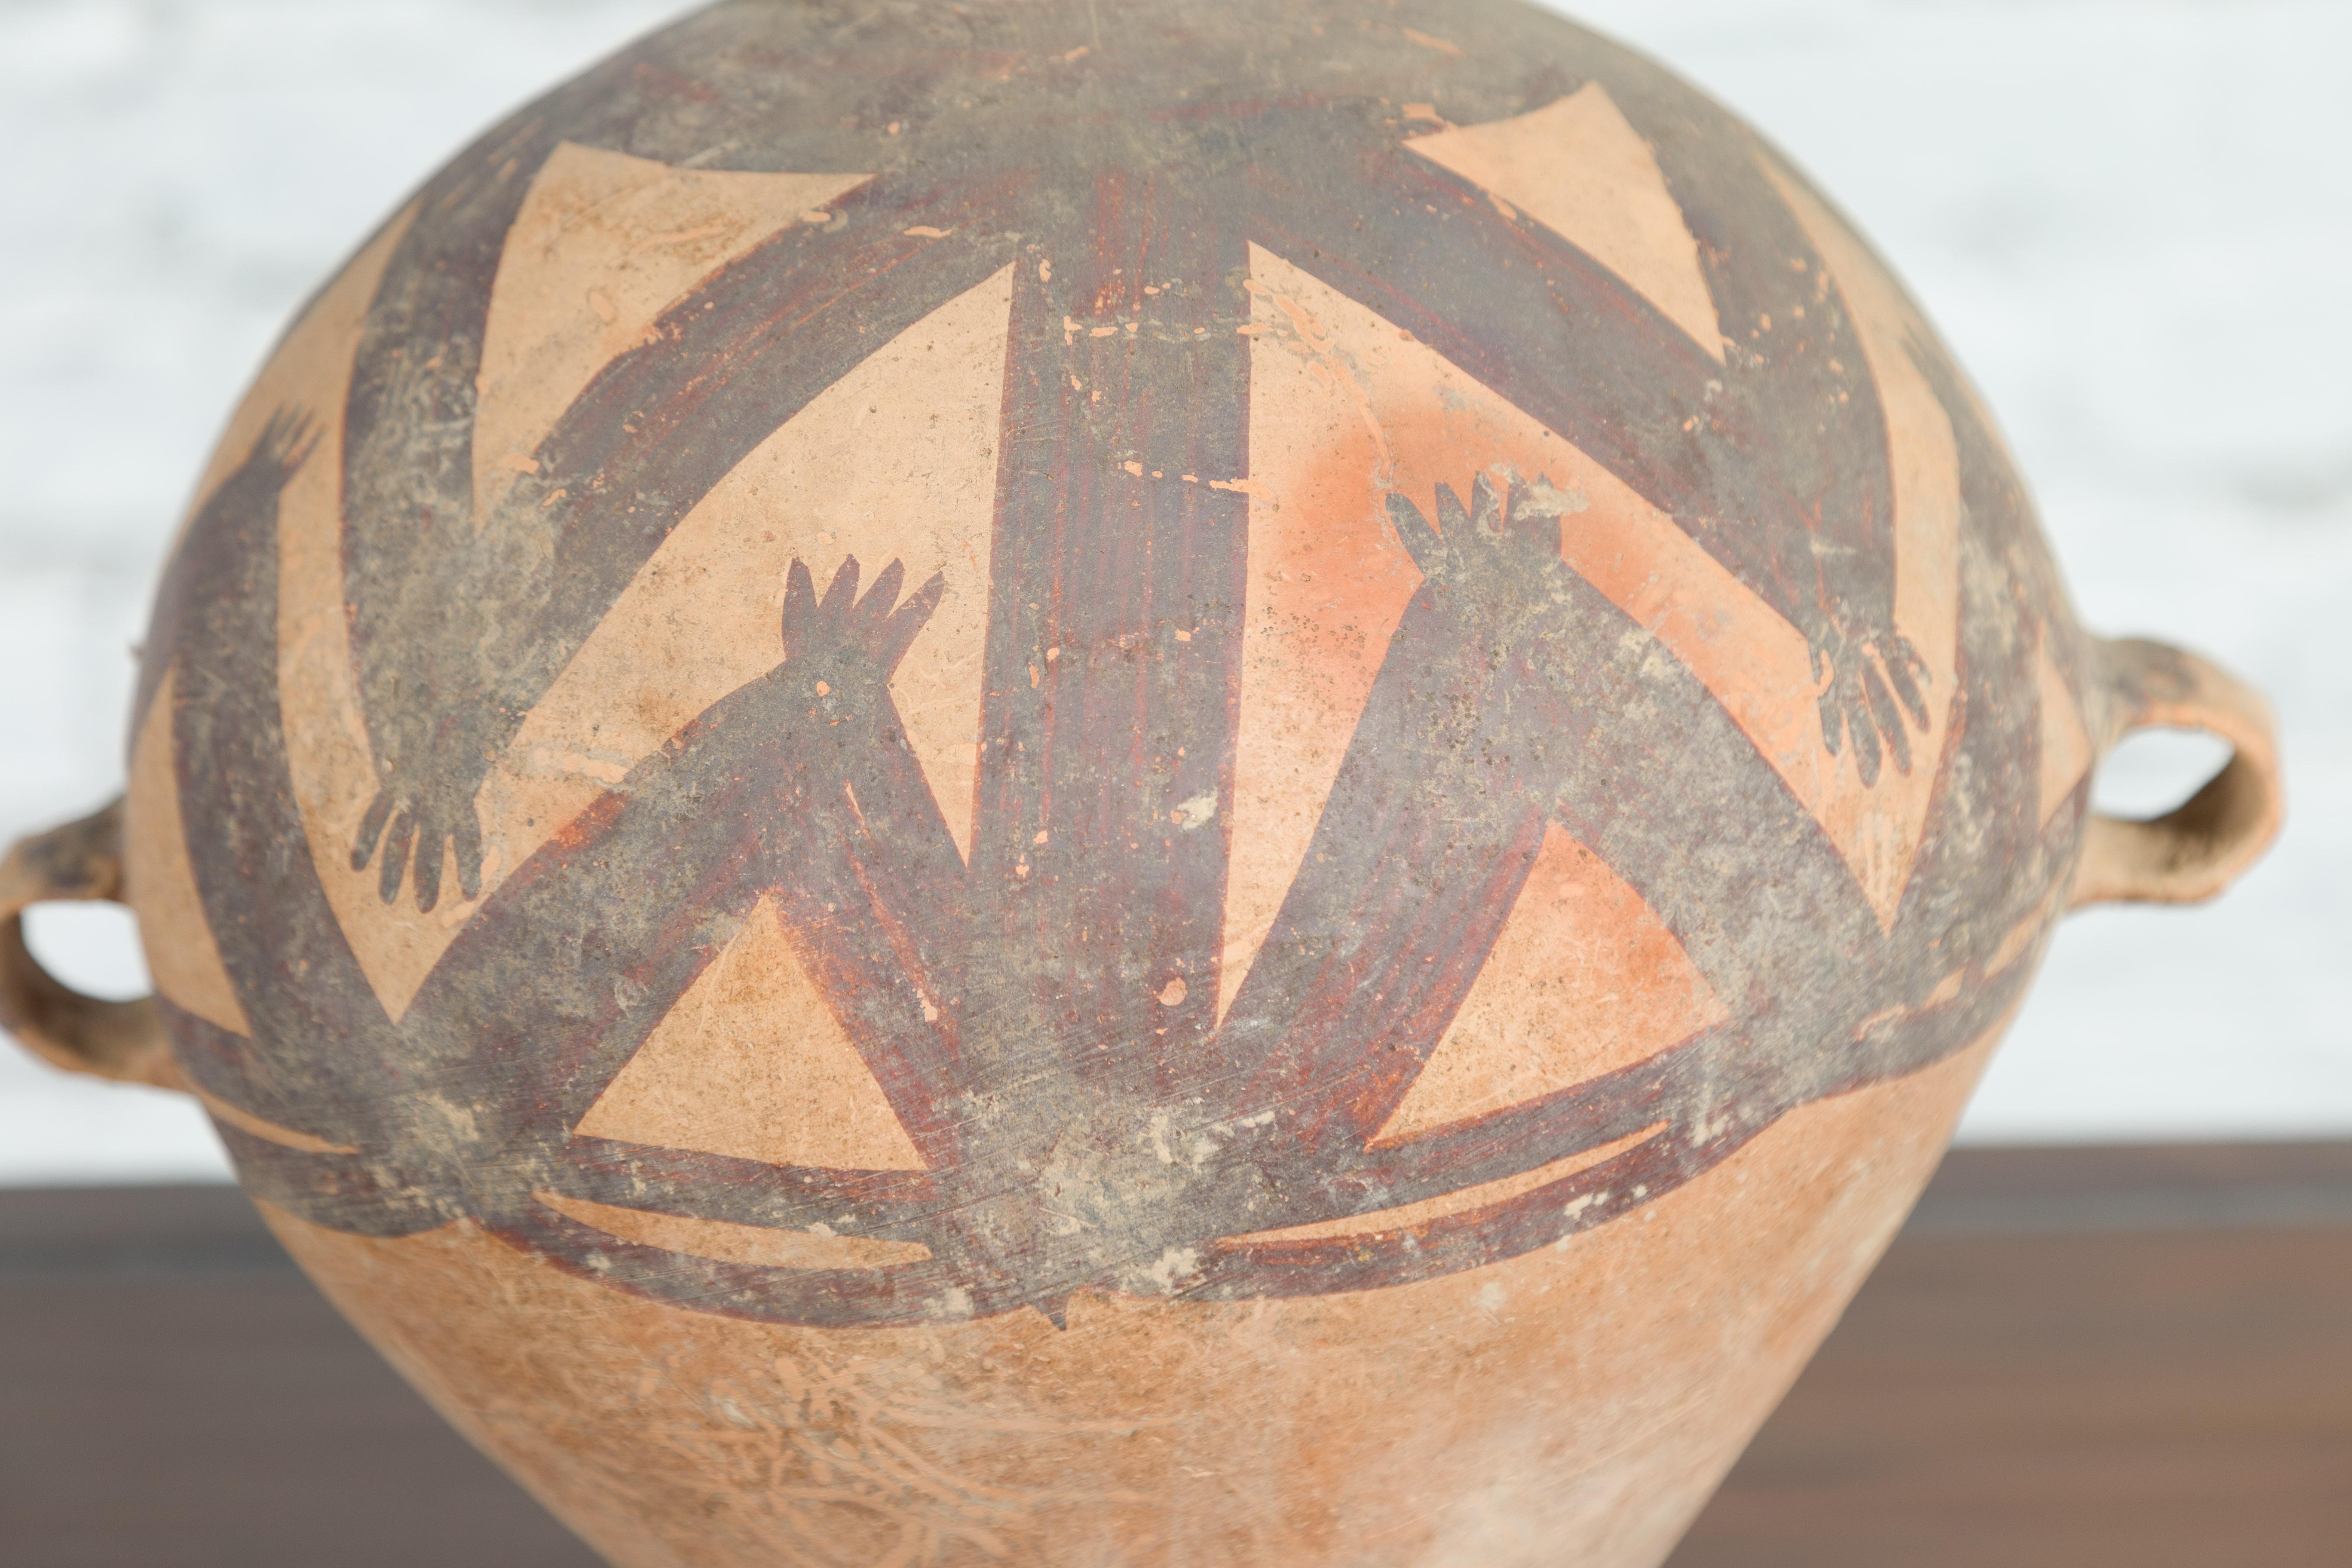 18th Century and Earlier Chinese Neolithic Period 4000 BC Terracotta Storage Jar with Geometric Décor